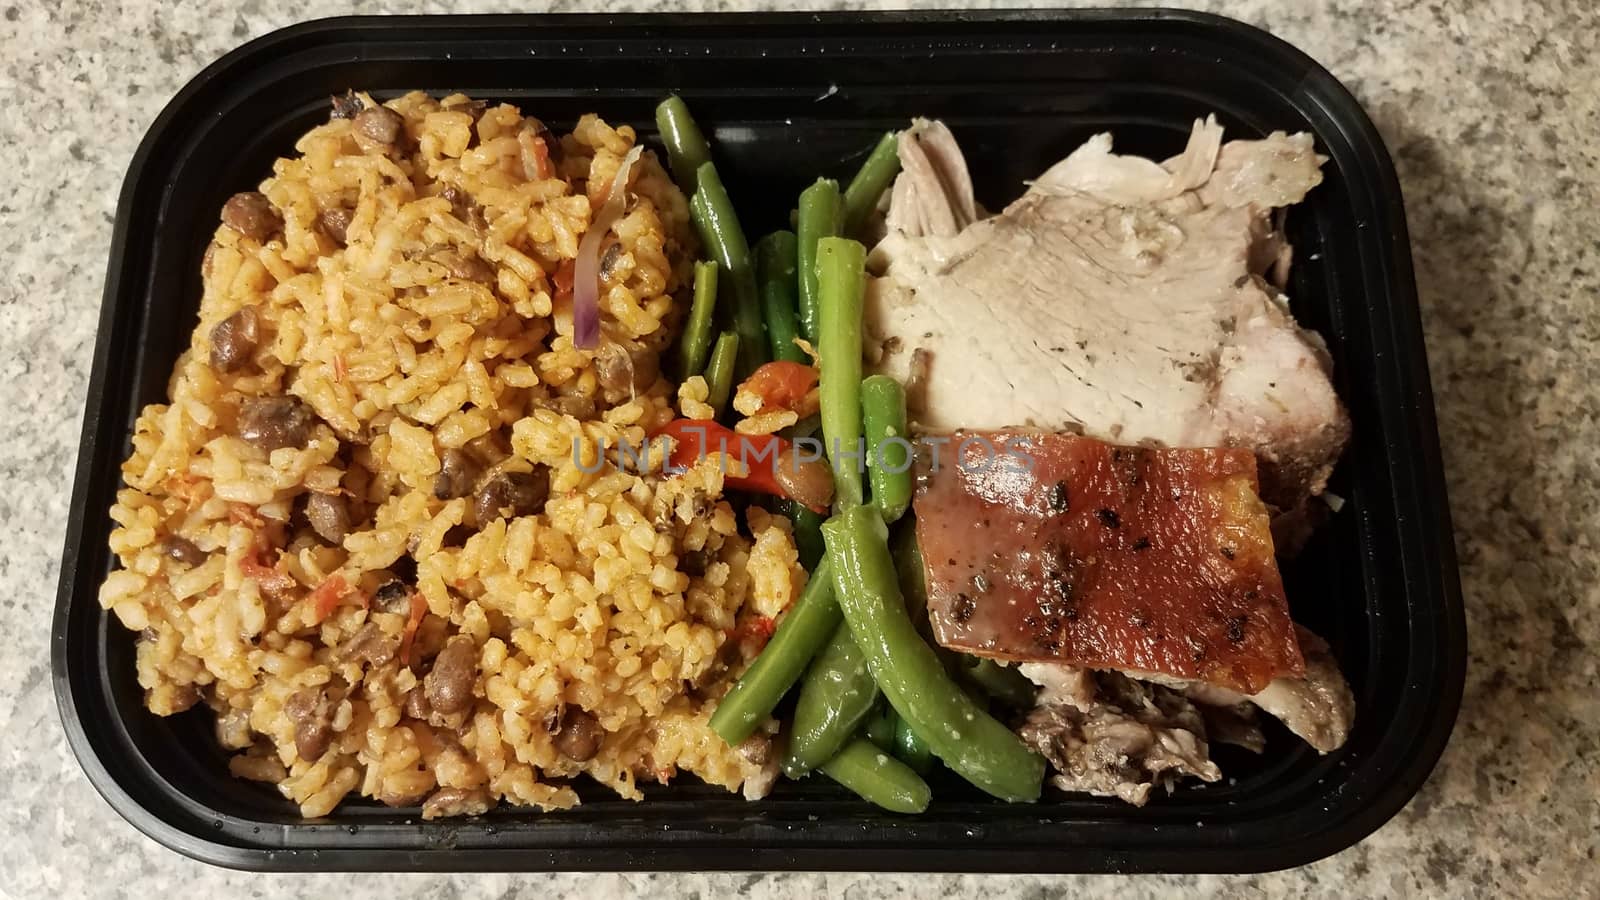 Puerto Rican pork and rice and beans in container on counter